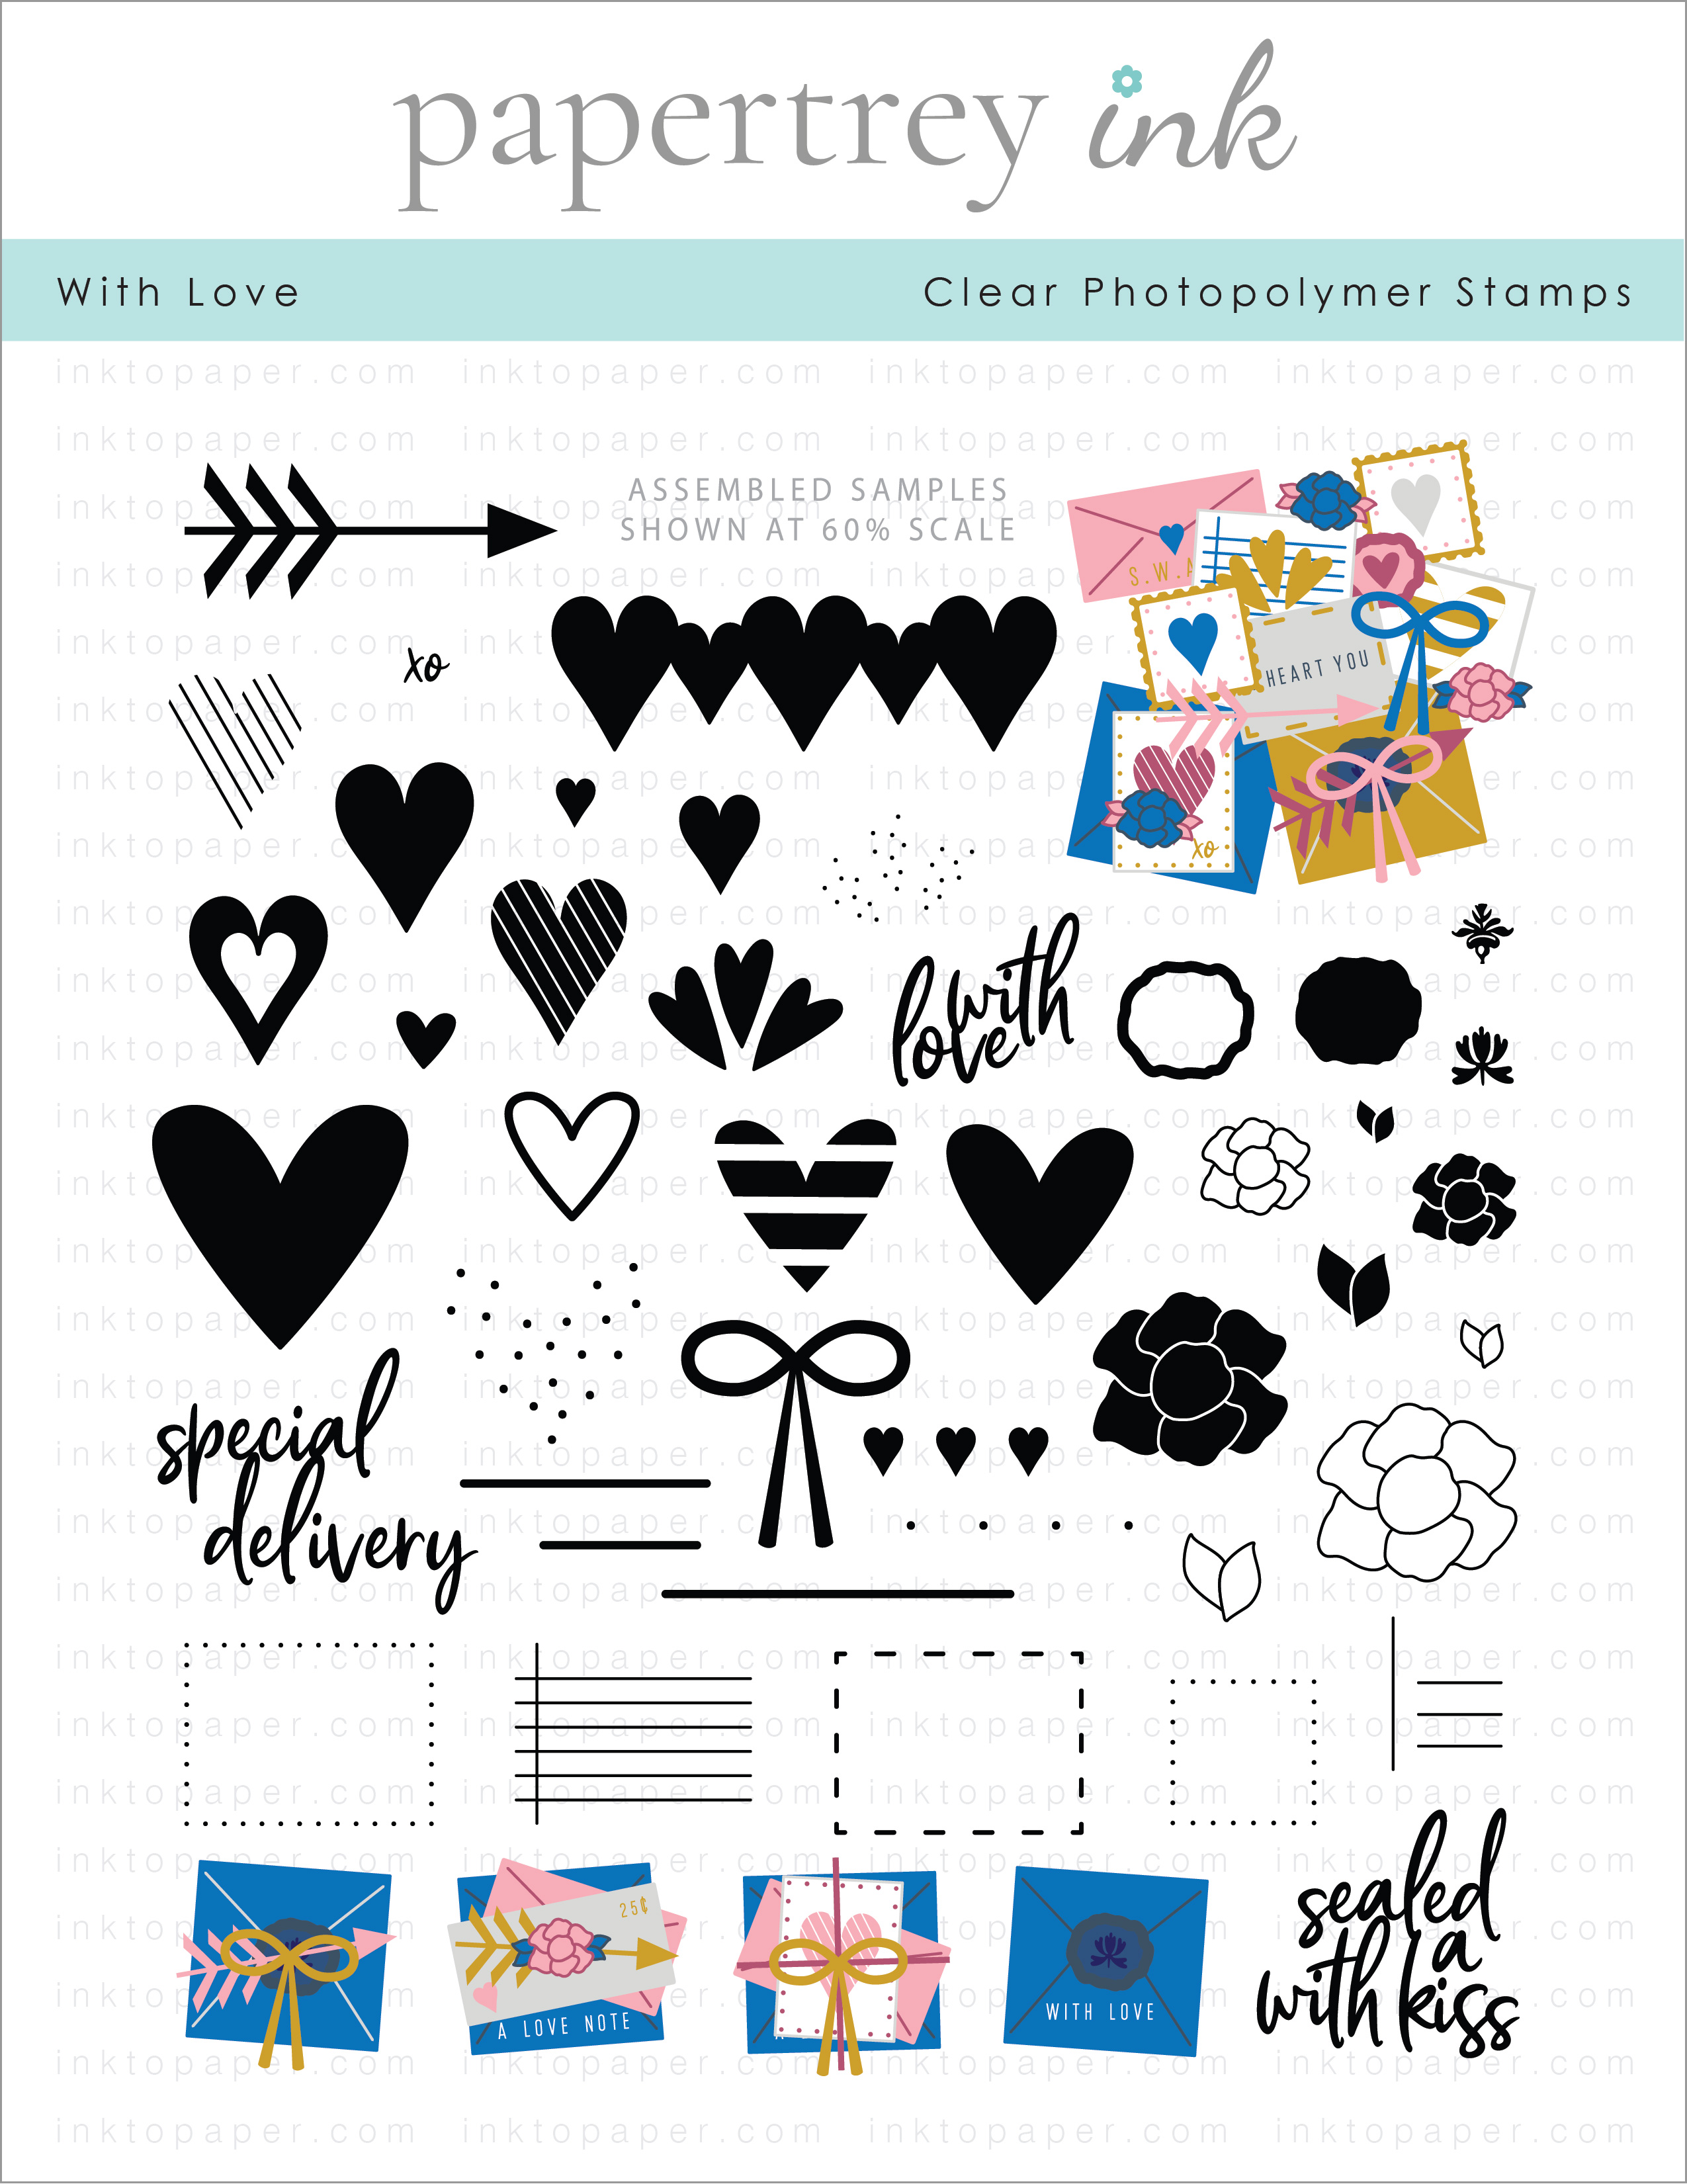 With Love Stamp Set